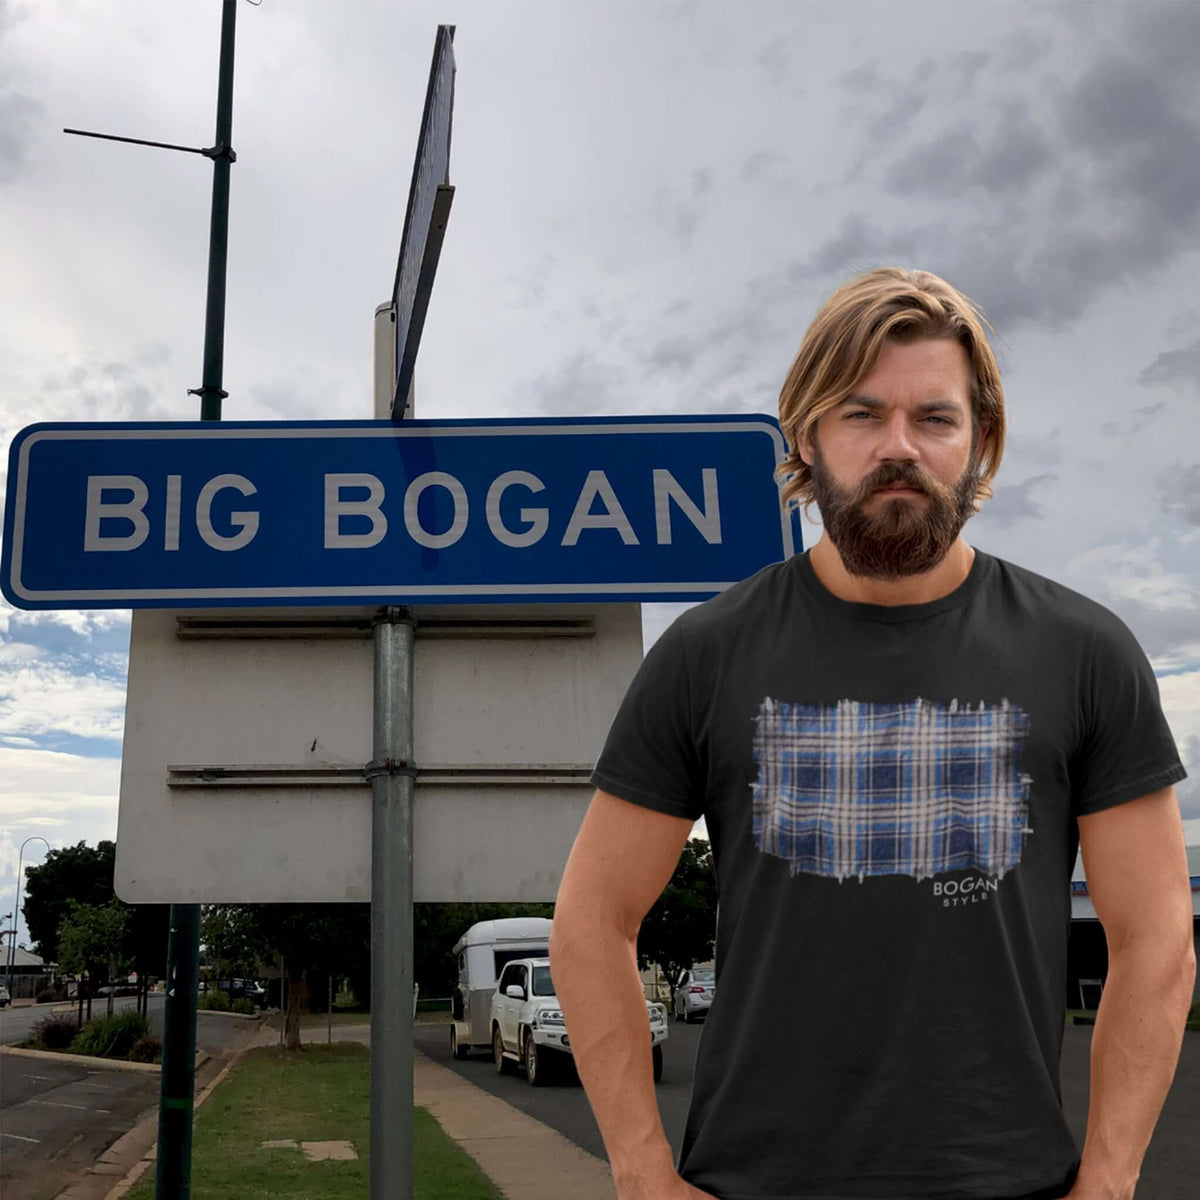 Man stands in front of Big Bogan sign wearing black tee with flanno design on front